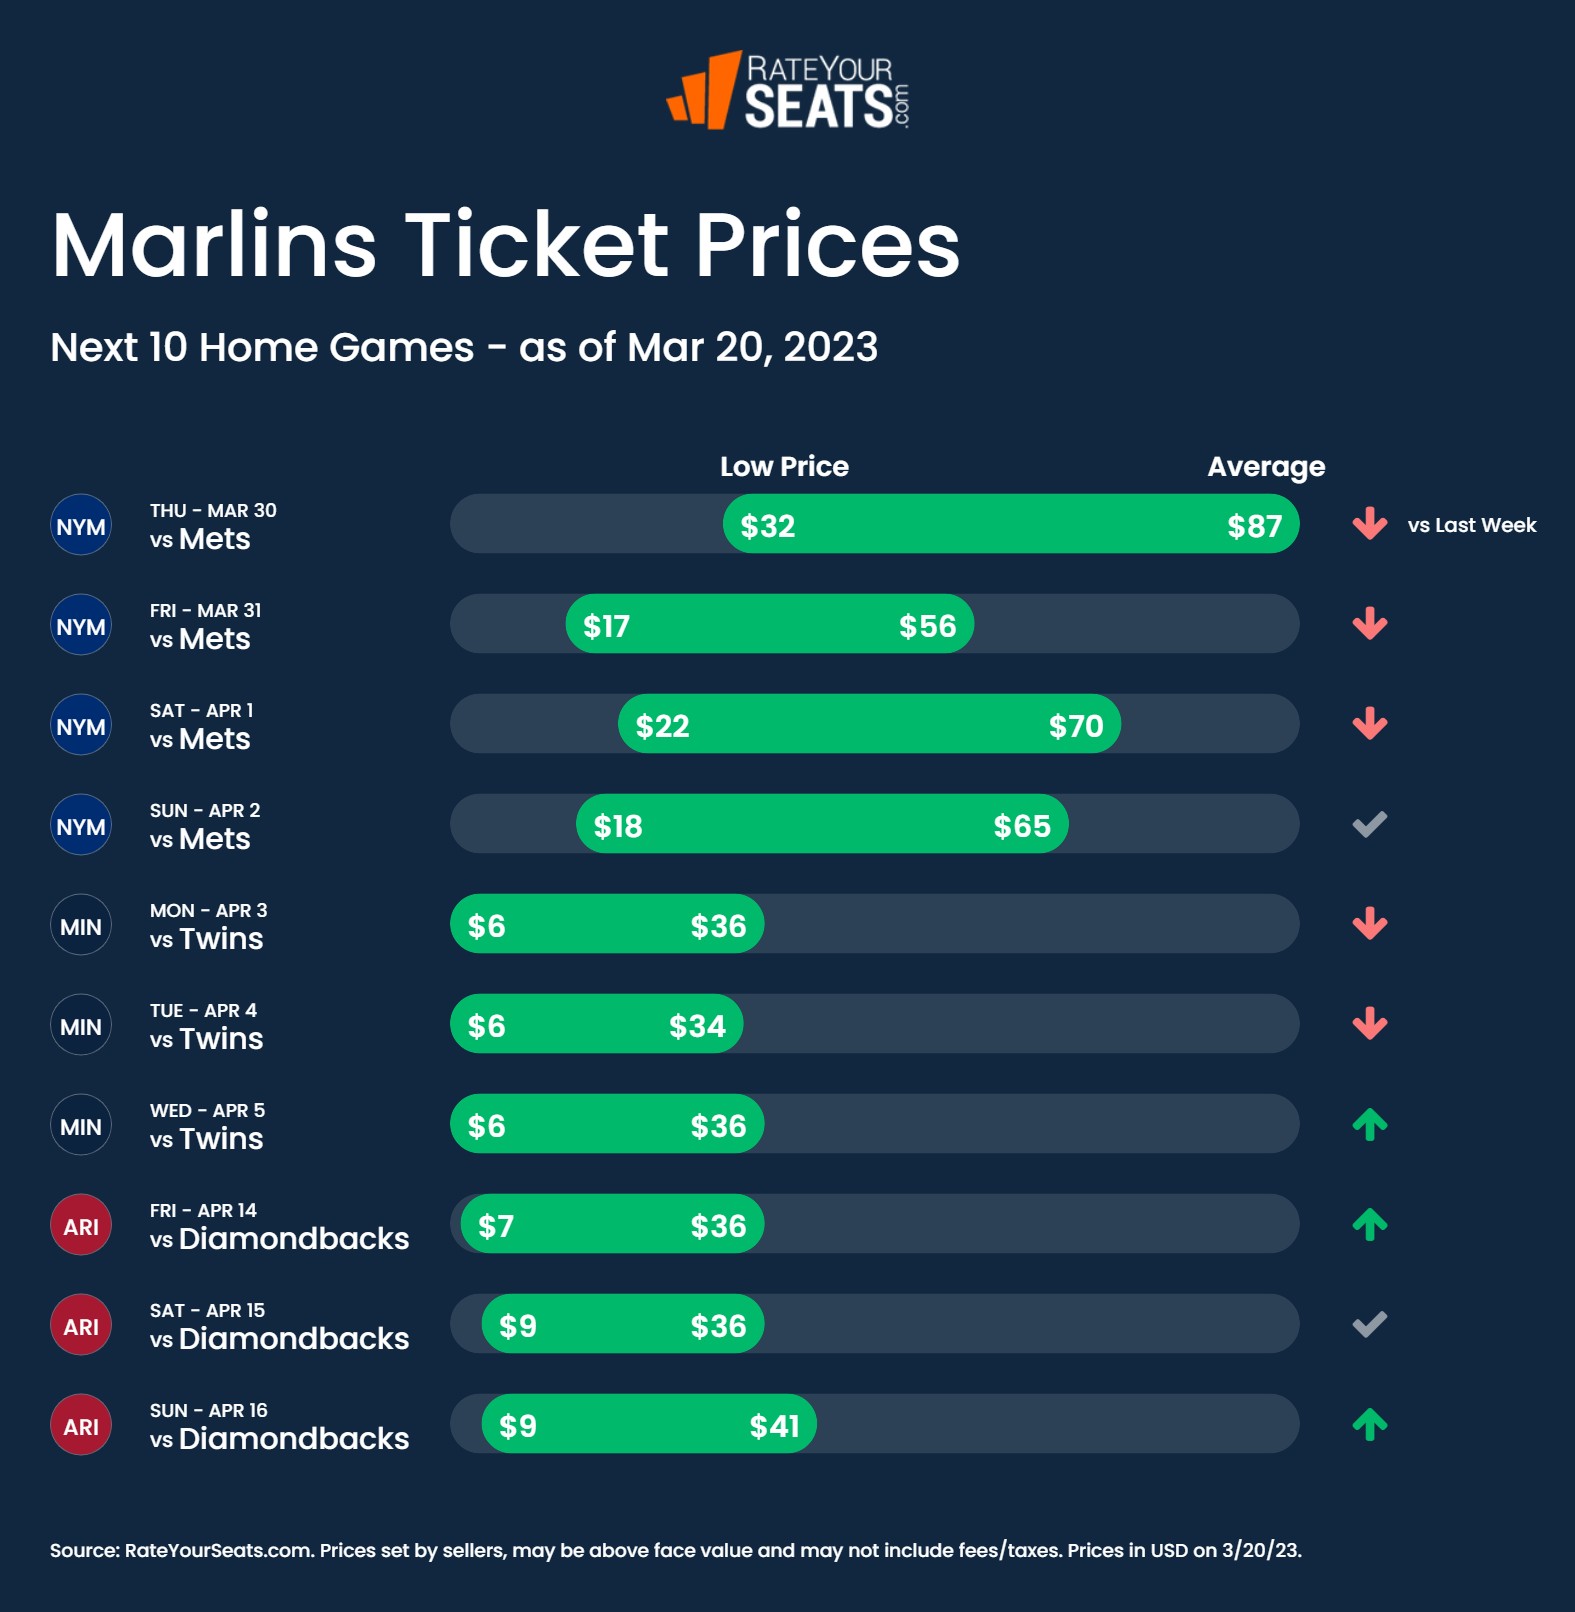 Marlins tickets pricing week of March 20 2023